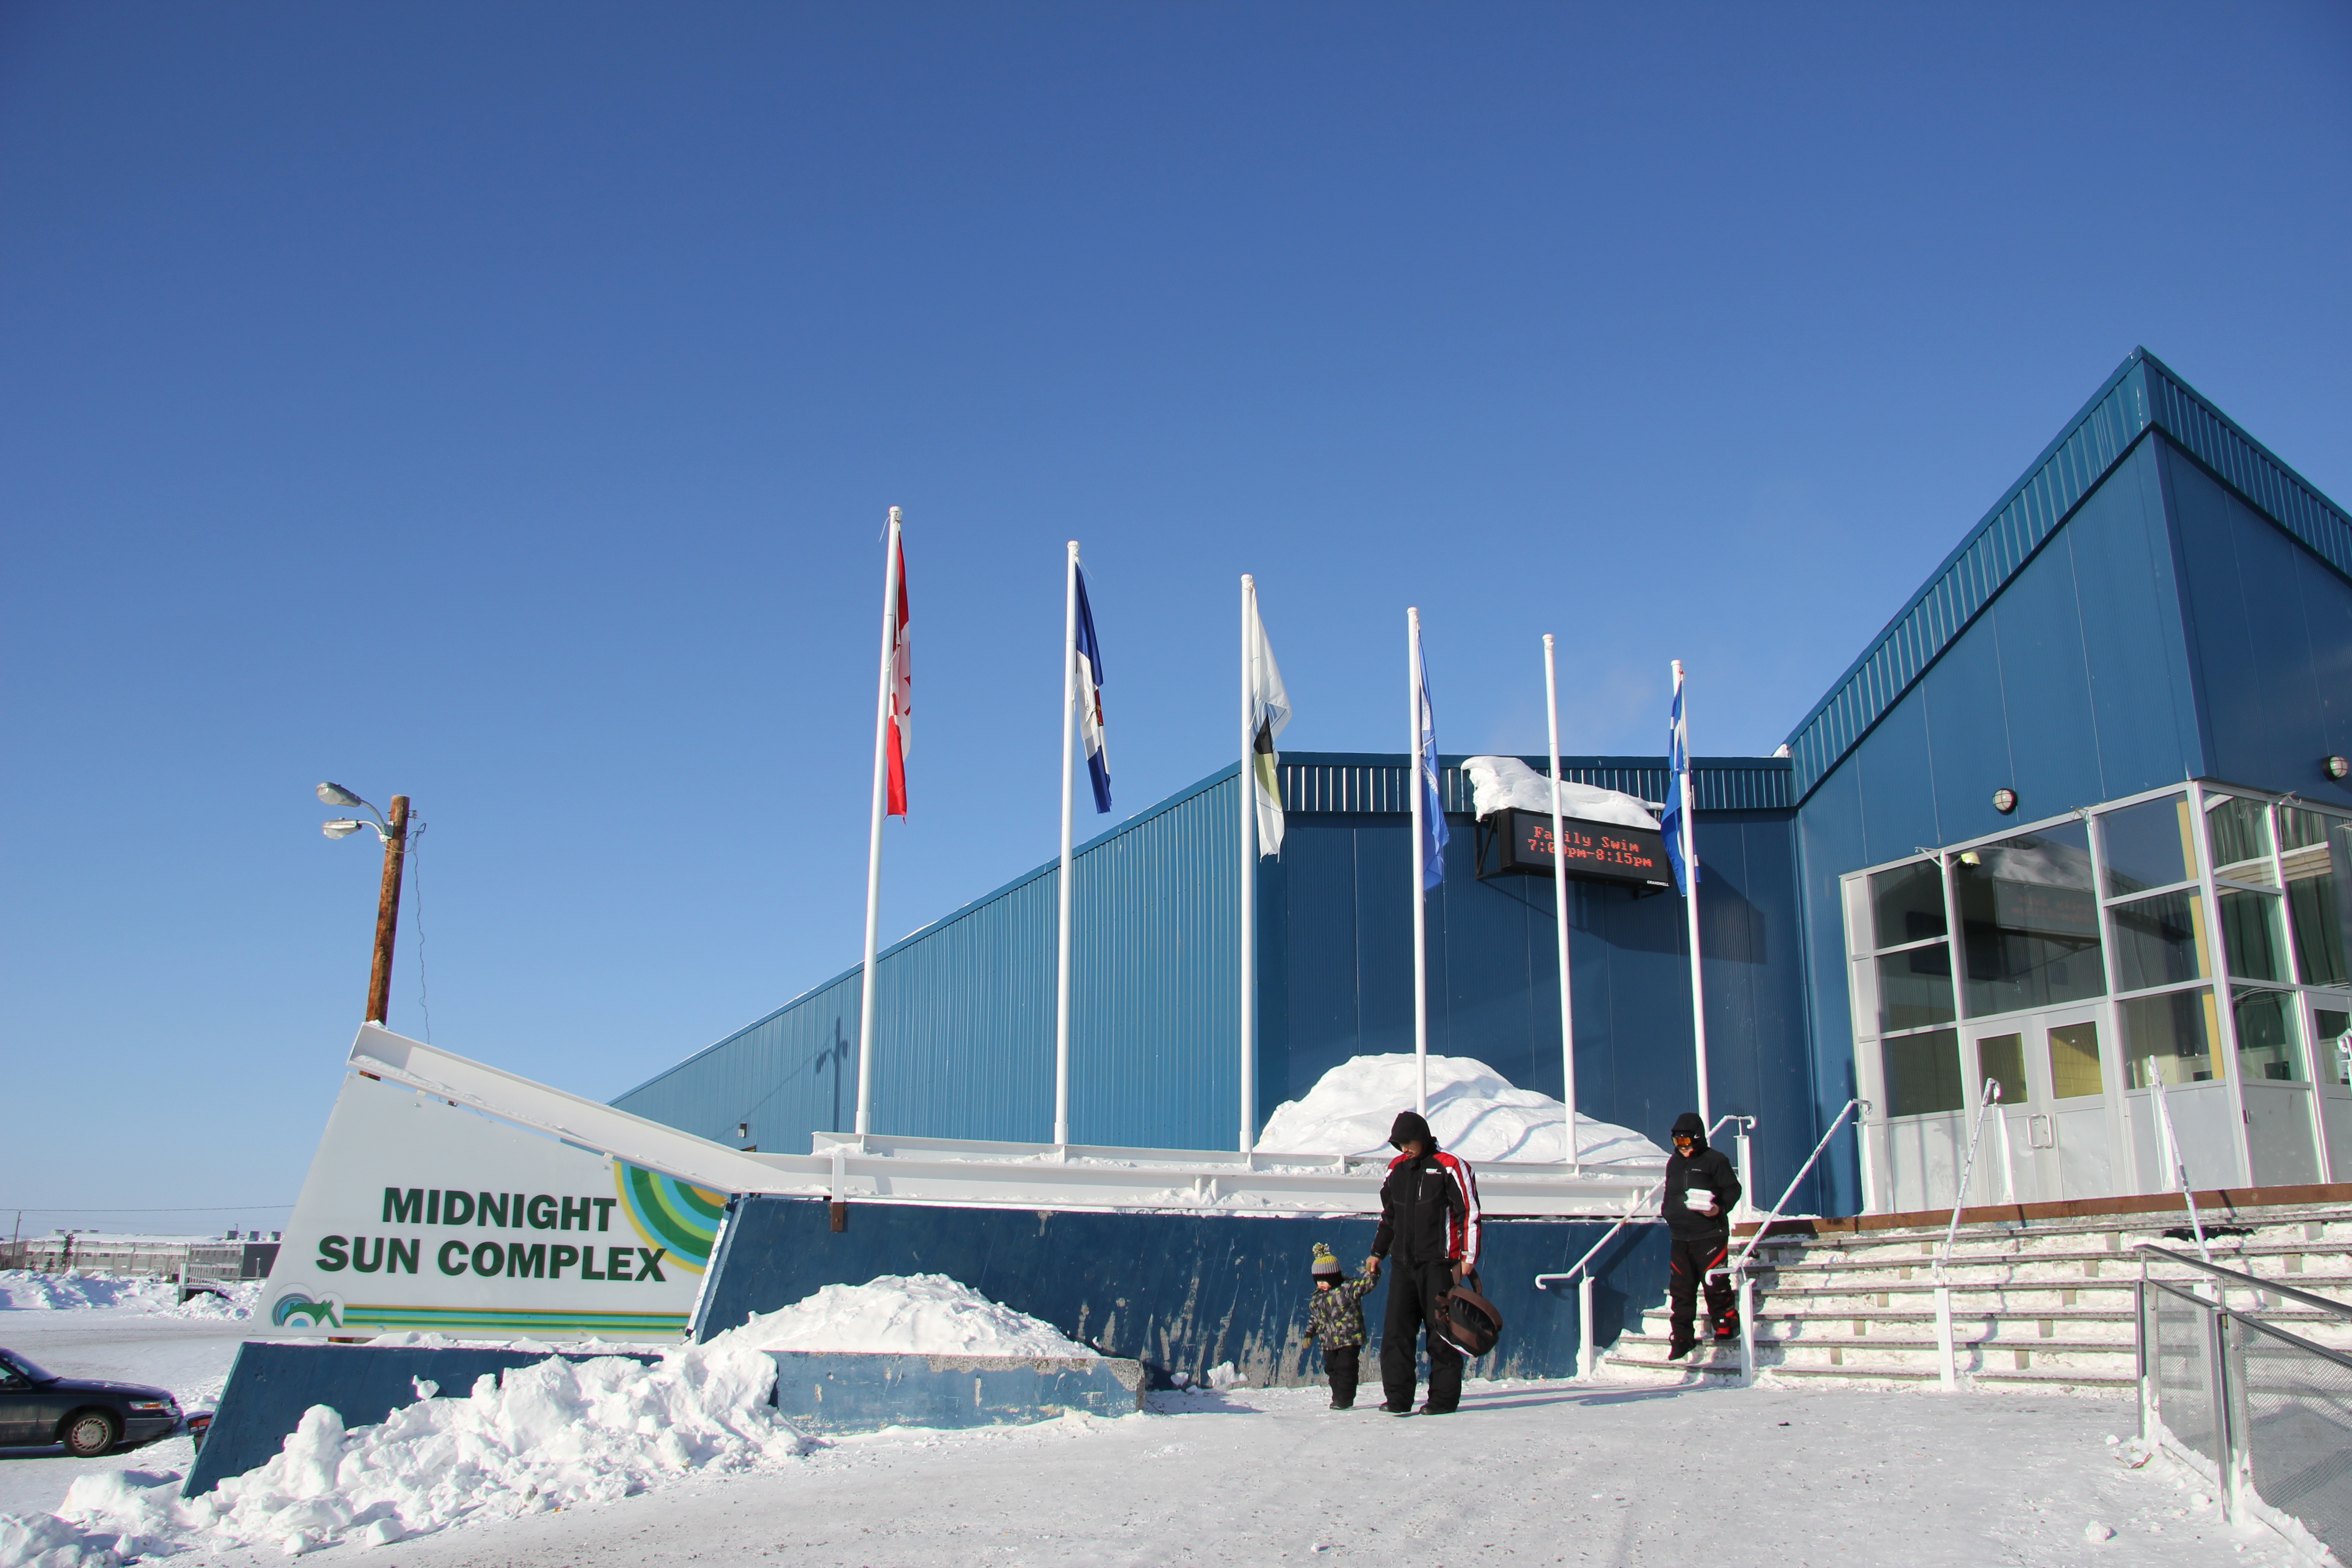 Inuvik's Midnight Sun Complex in Canada's Northwest Territories.  CBC's Cross Country Checkup call-in show  visited Inuvik earlier this month to ask the question: 